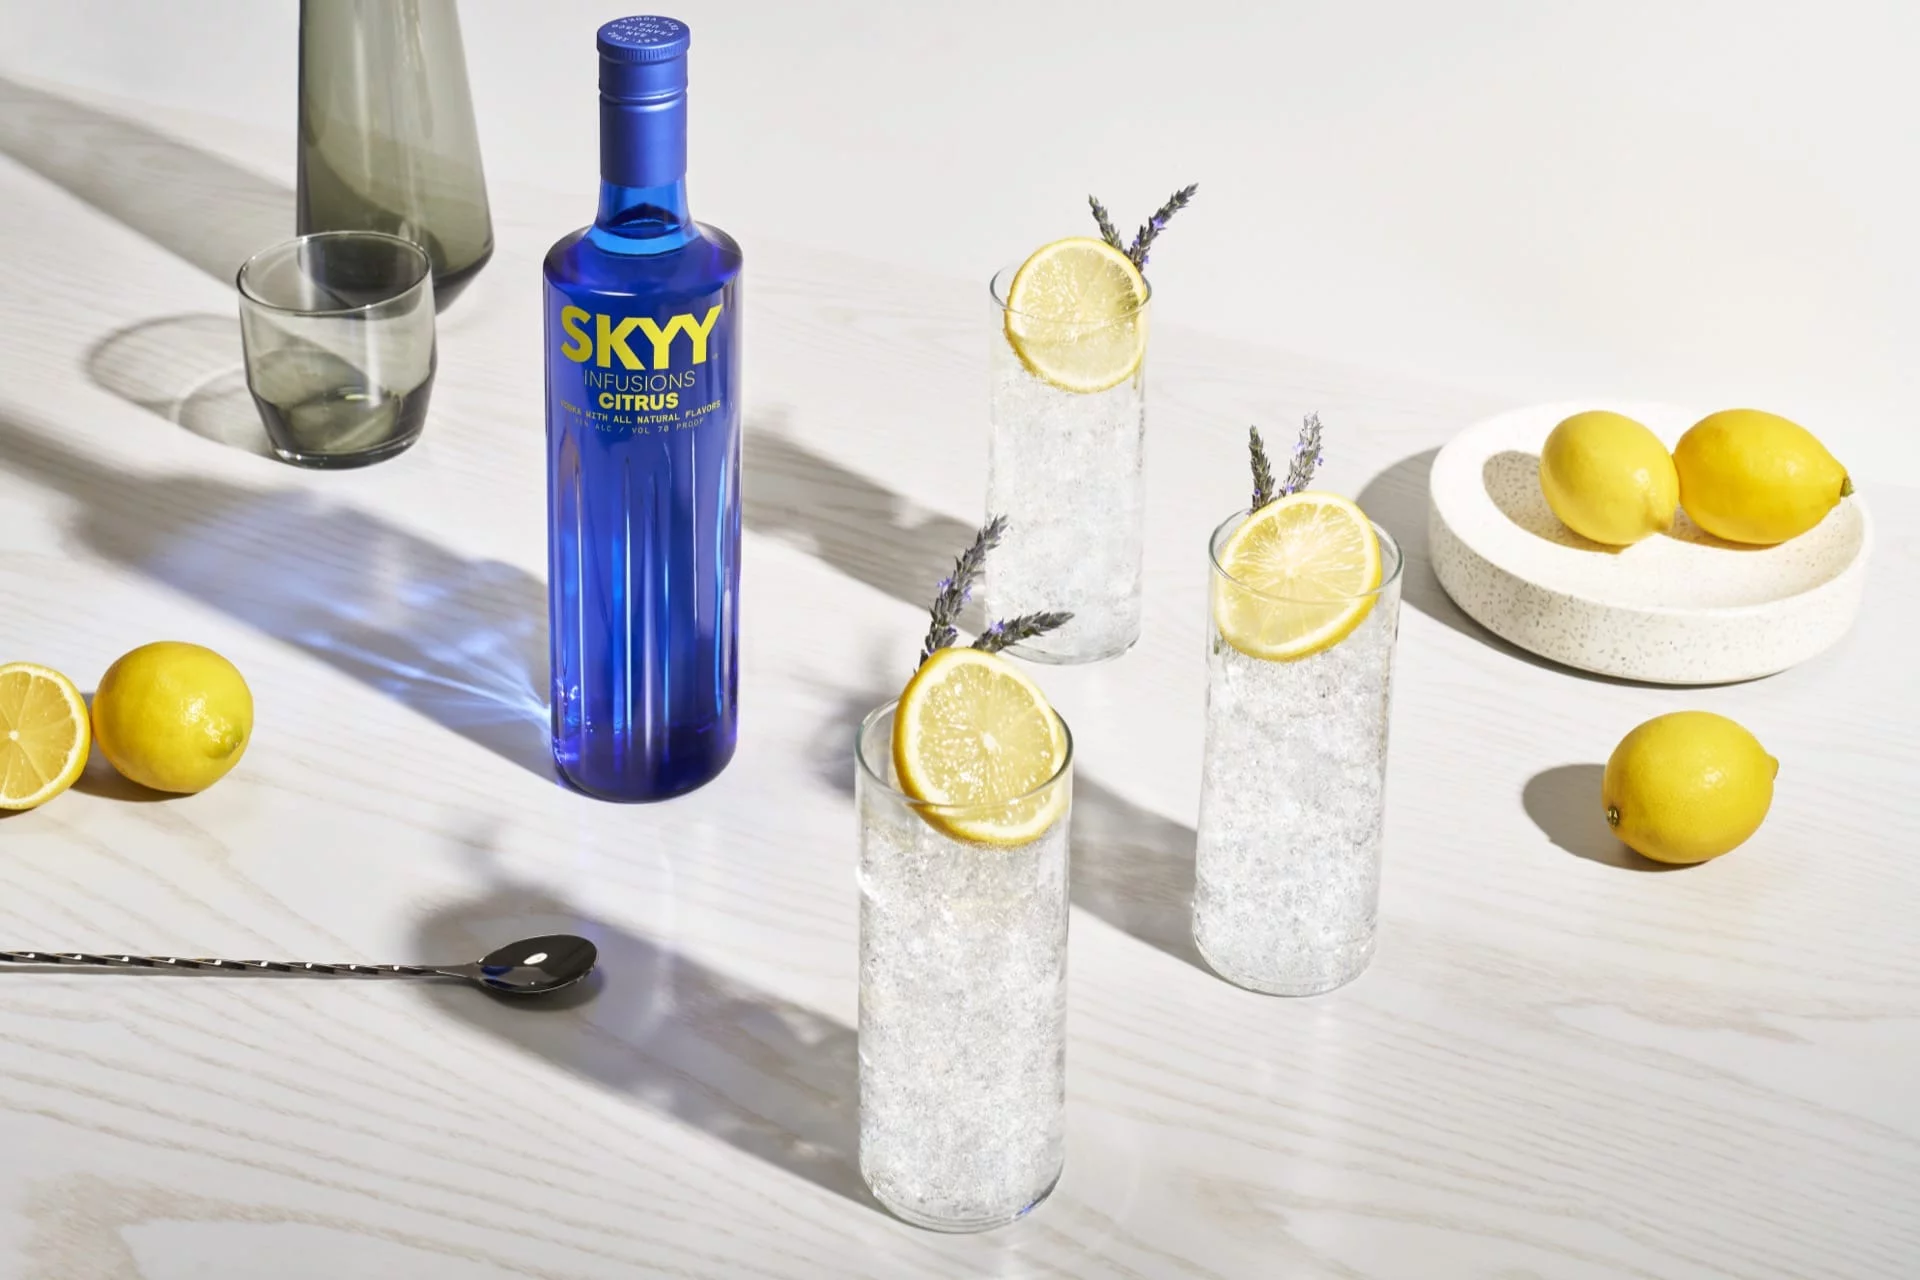 products-skyy-infusions-citrus-fullsize